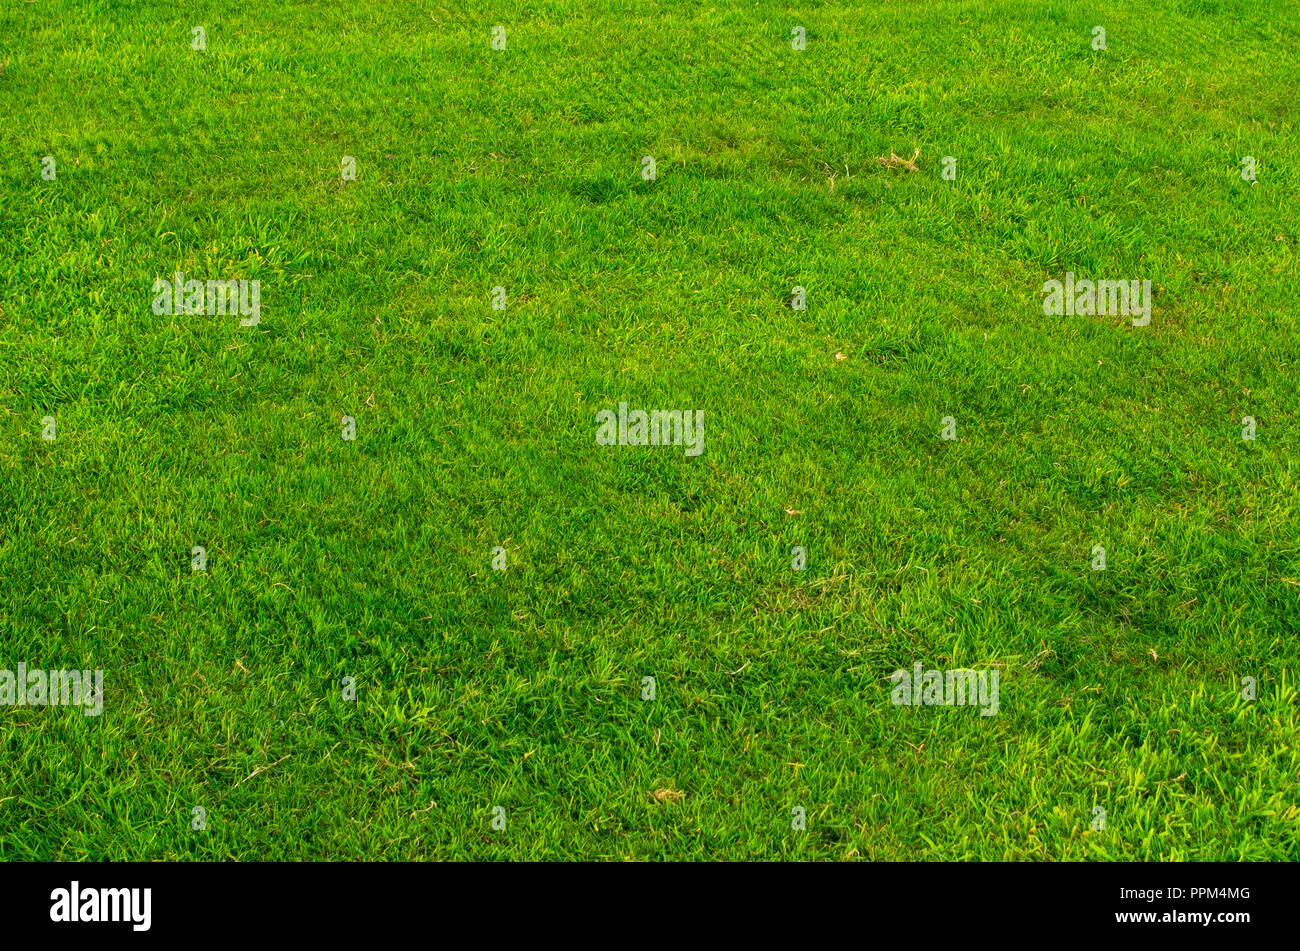 sward or lawn of short green grass Stock Photo